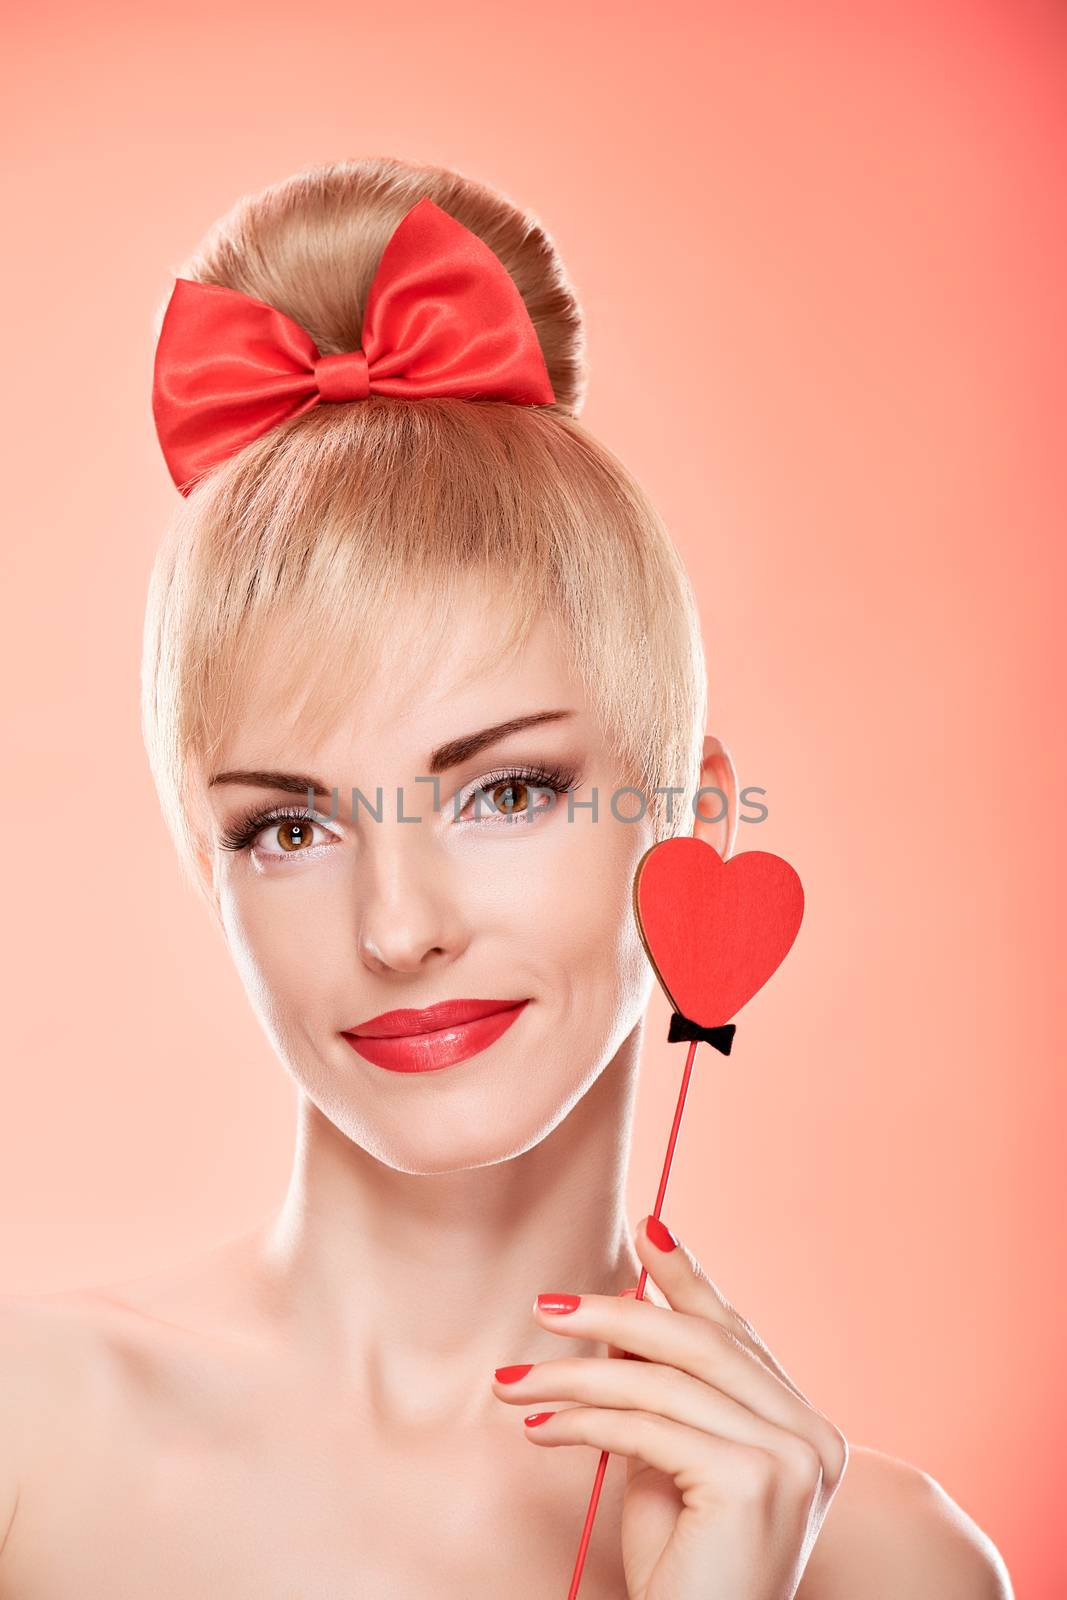 Beauty fashion portrait woman smiling with red heart. Valentines Day, love. Sensual attractive pretty nude blonde sexy girl, Pinup hairstyle, bow. Unusual emotional playful. Romantic, retro vintage 